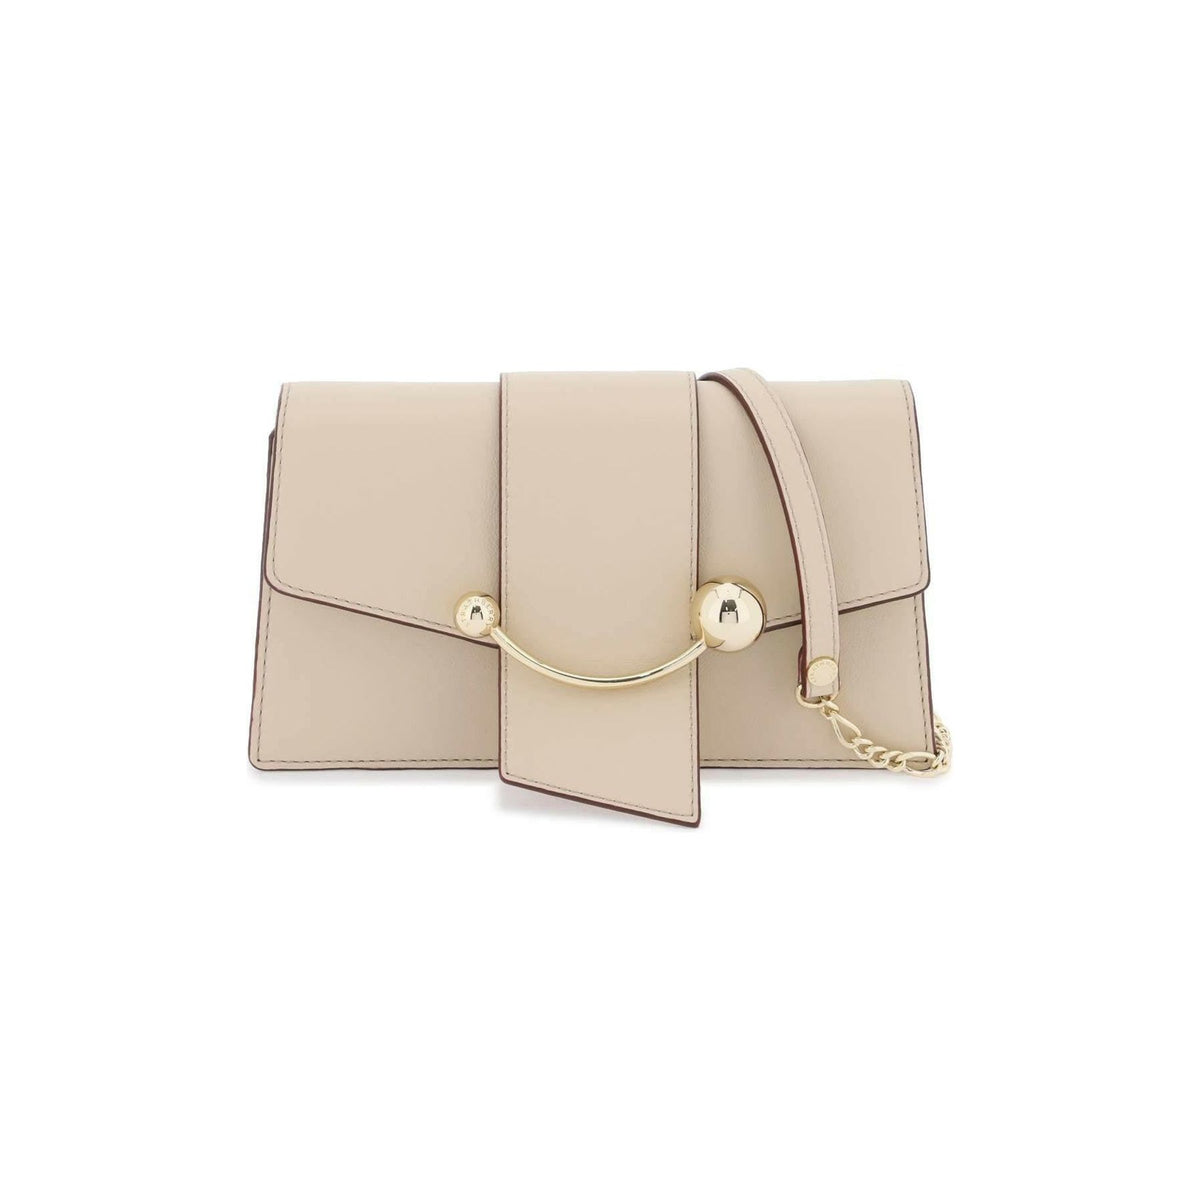 Oat Beige 'Crescent On A Chain' Leather Bag STRATHBERRY JOHN JULIA.